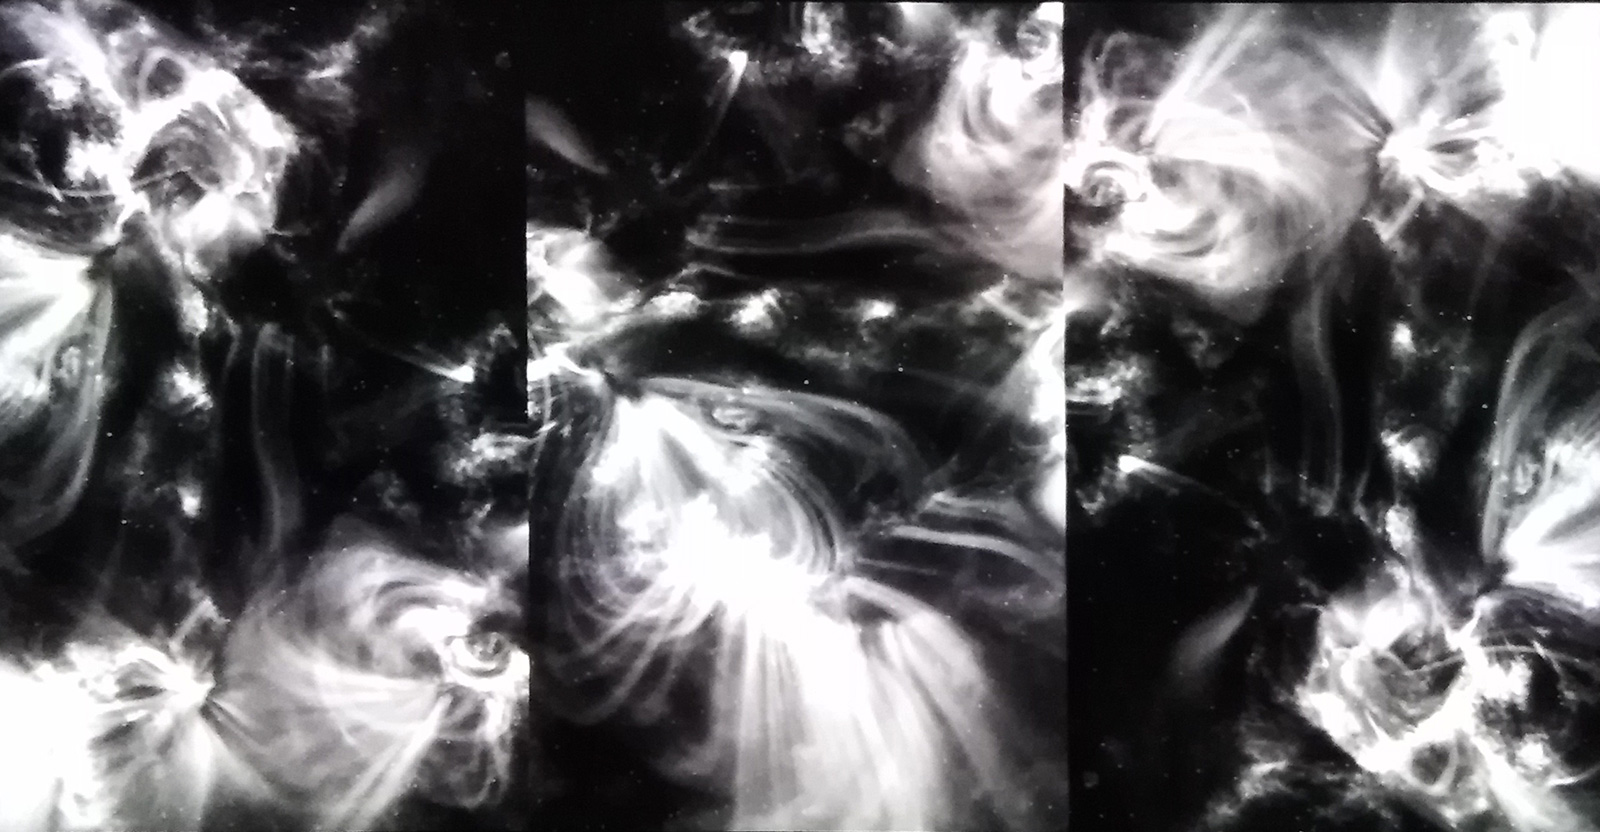 A three panel blakc and white abstract video image of swirling forces.